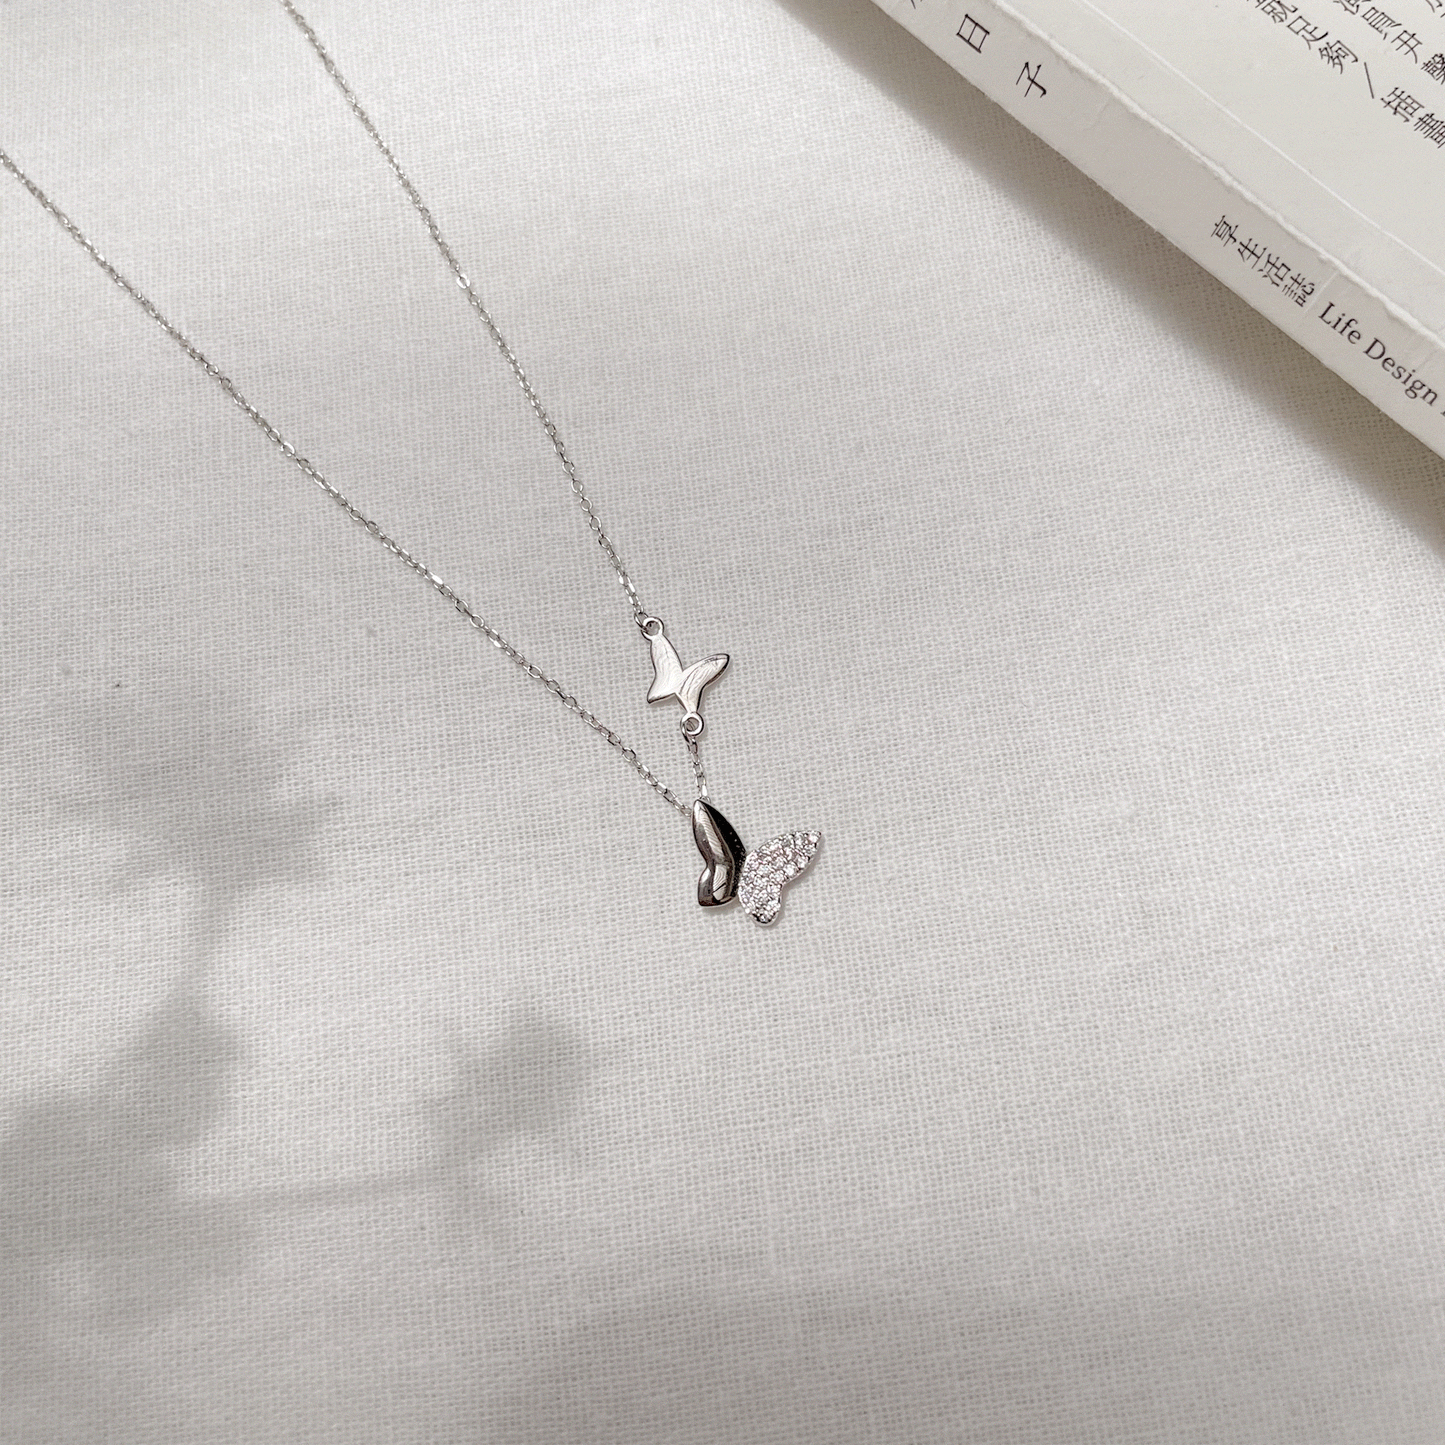 To-get-her- Fritillary Necklace